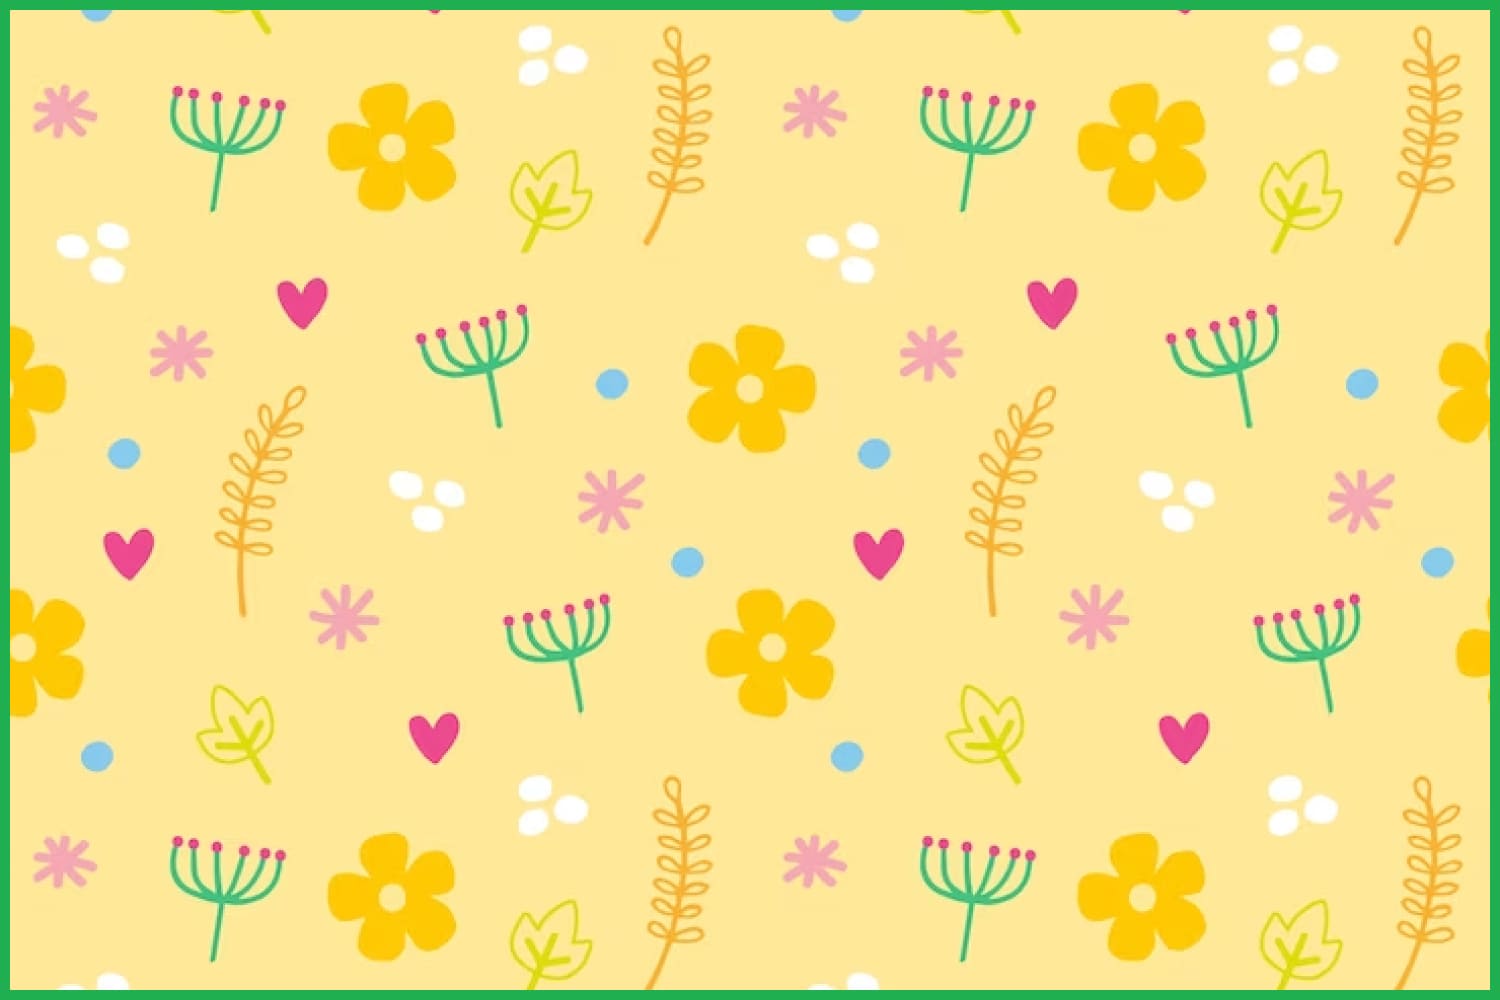 Drawn flowers, leaves, circles, hearts on a yellow background.